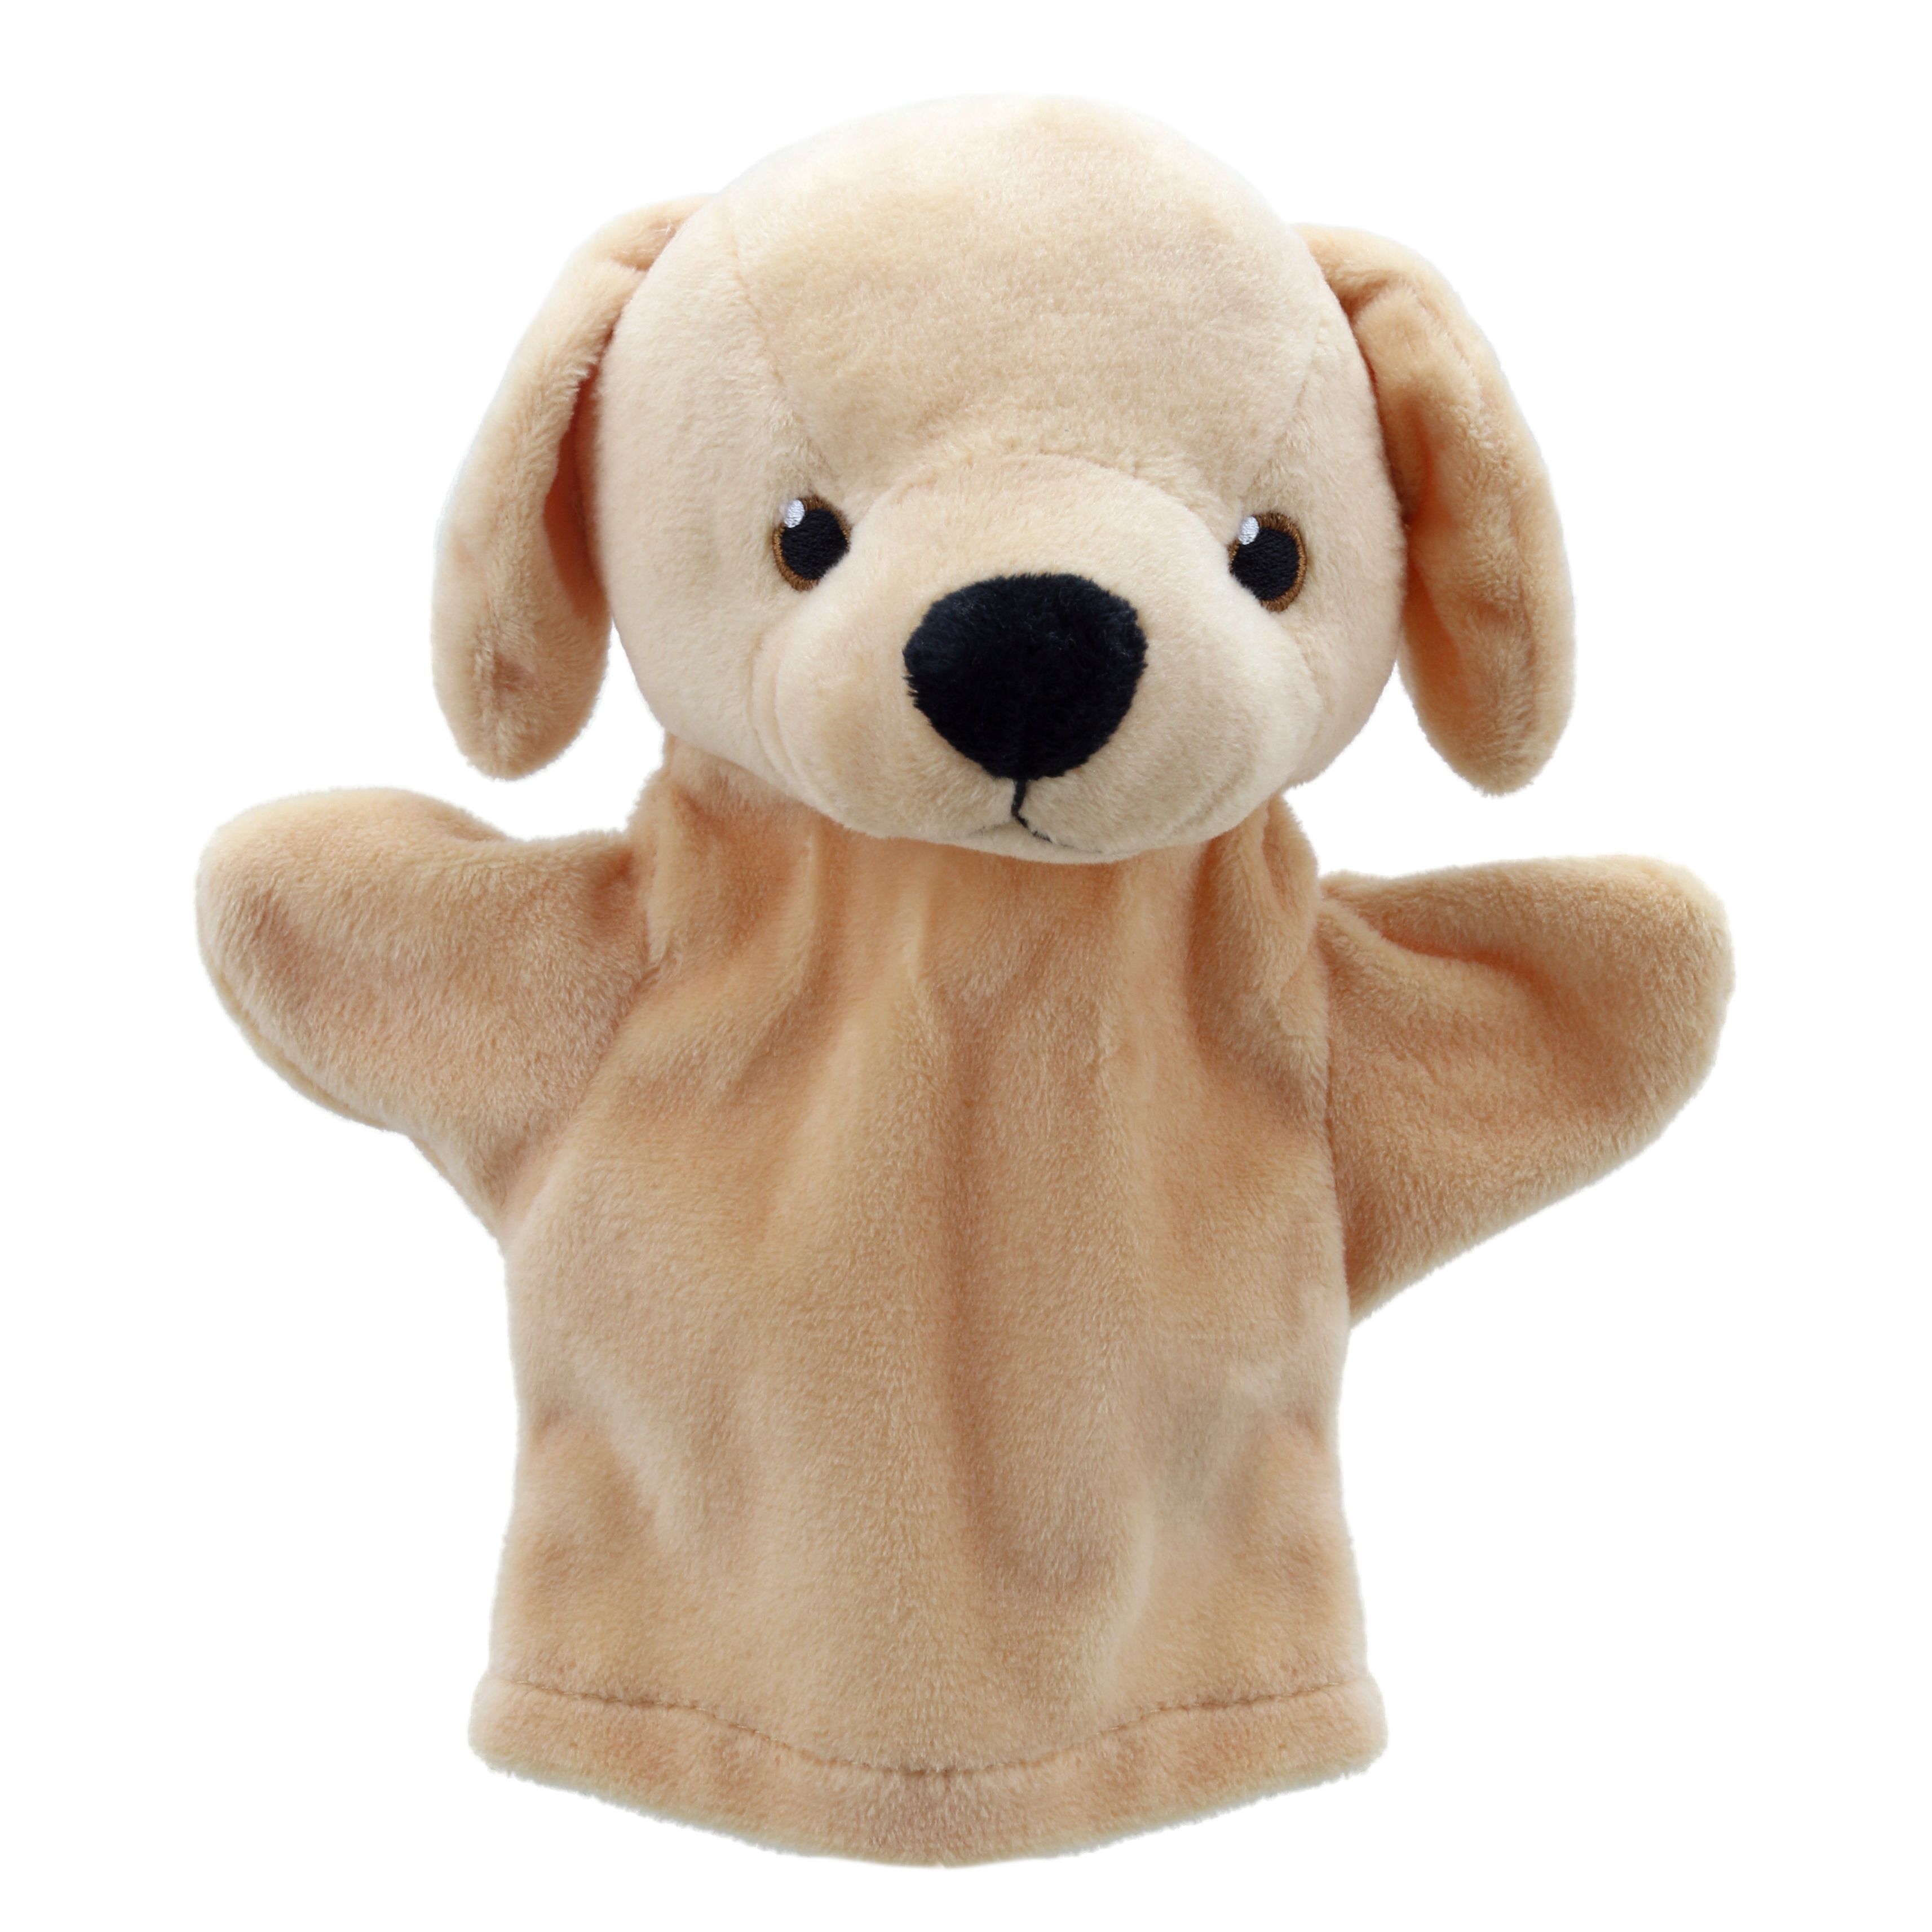 Baby hand puppet labrador - Puppet Company